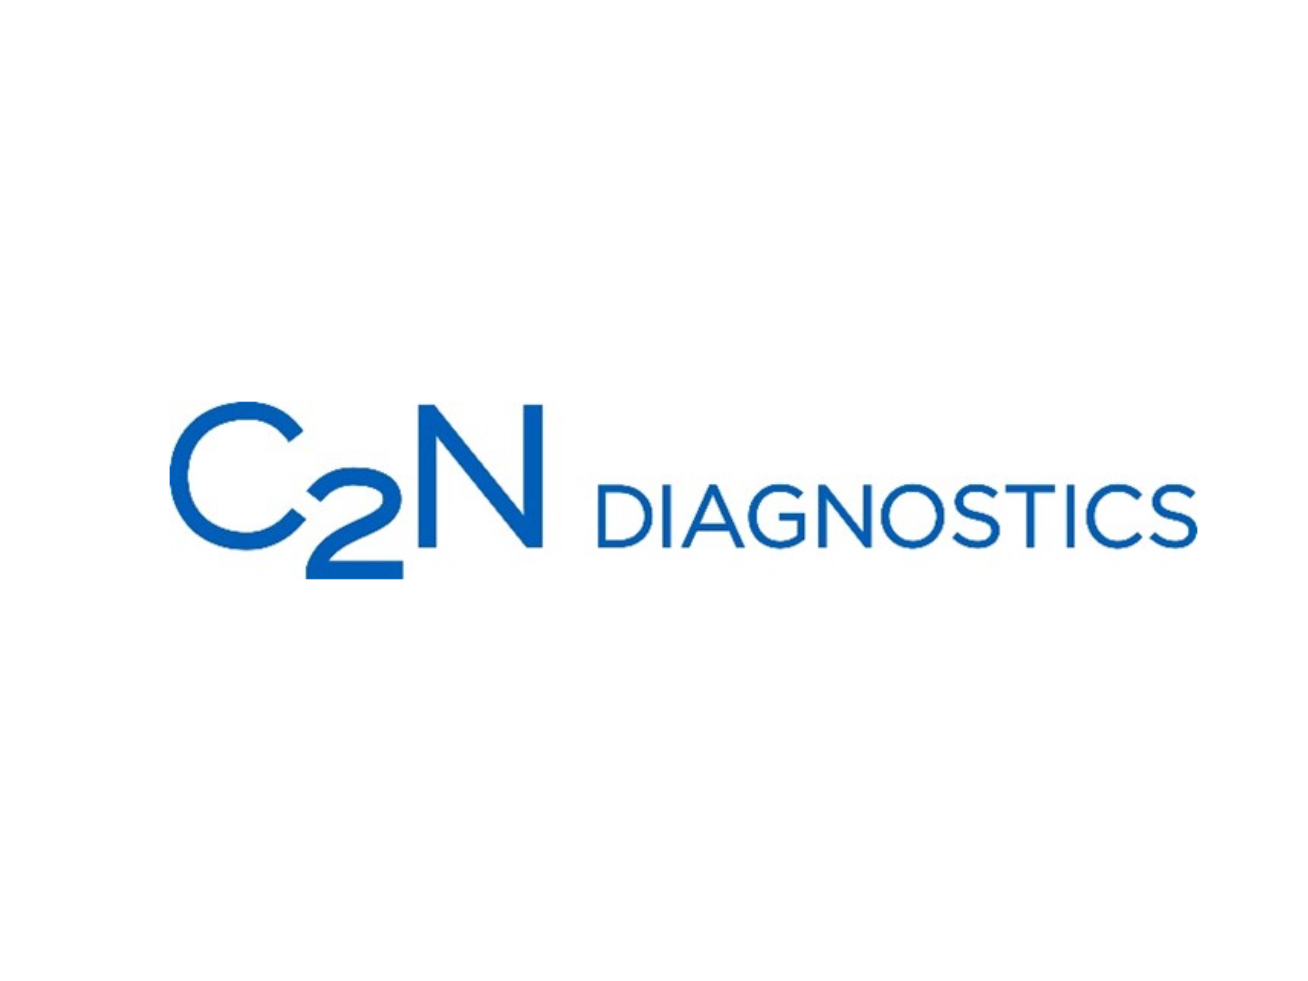 C2N Diagnostics announces study confirming accuracy of test for Alzheimer’s diagnosis